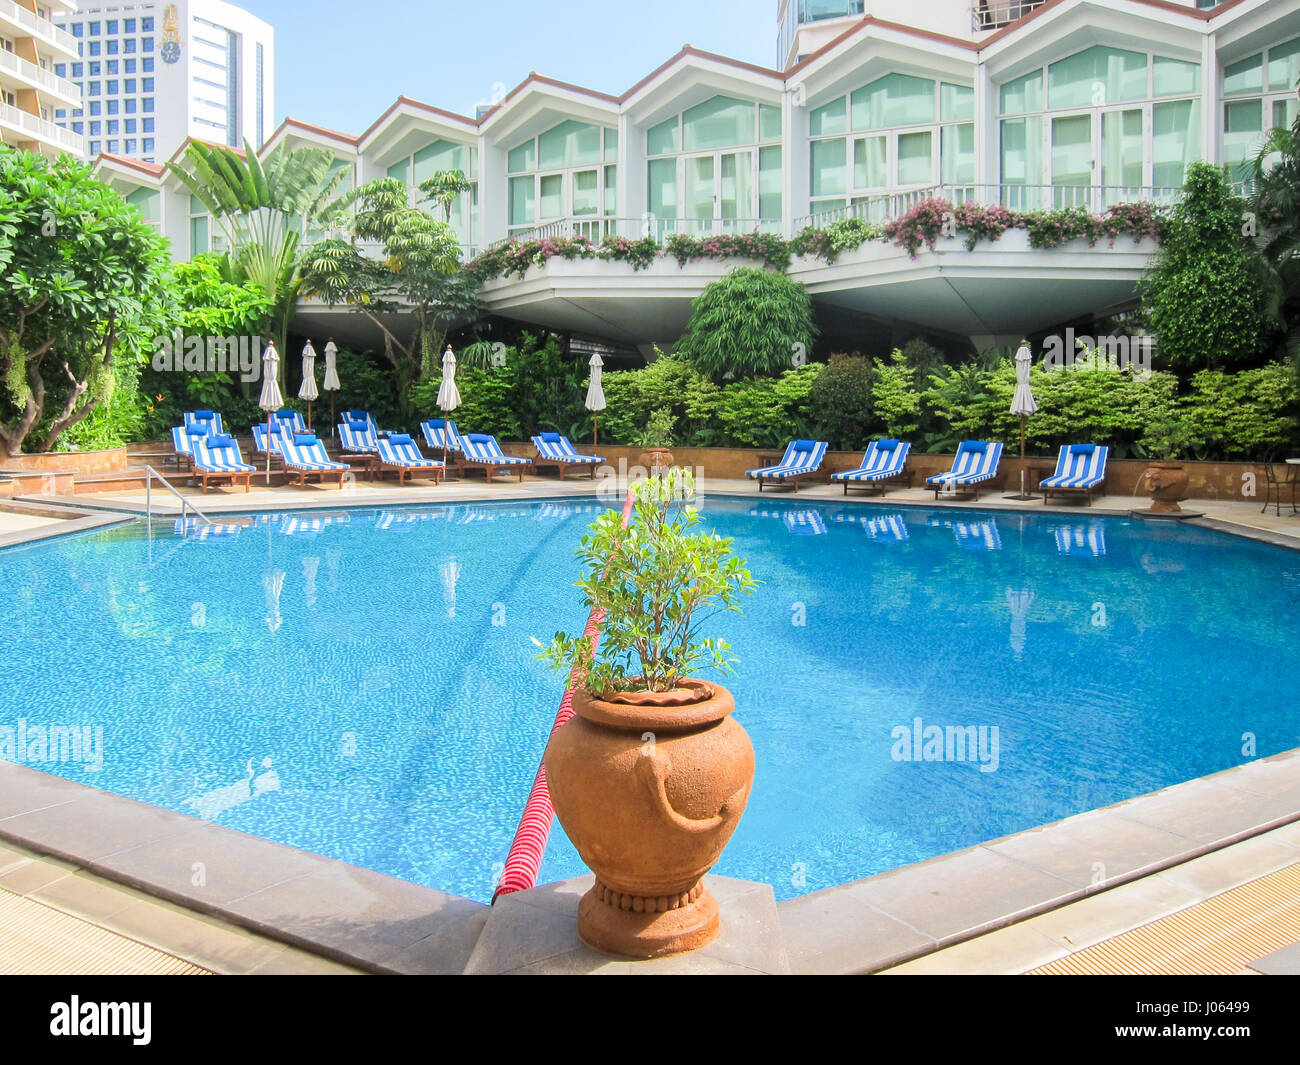 Swimming pool of the Dusit Thani five star hotel with sunbeds in Bangkok, Thailand Stock Photo